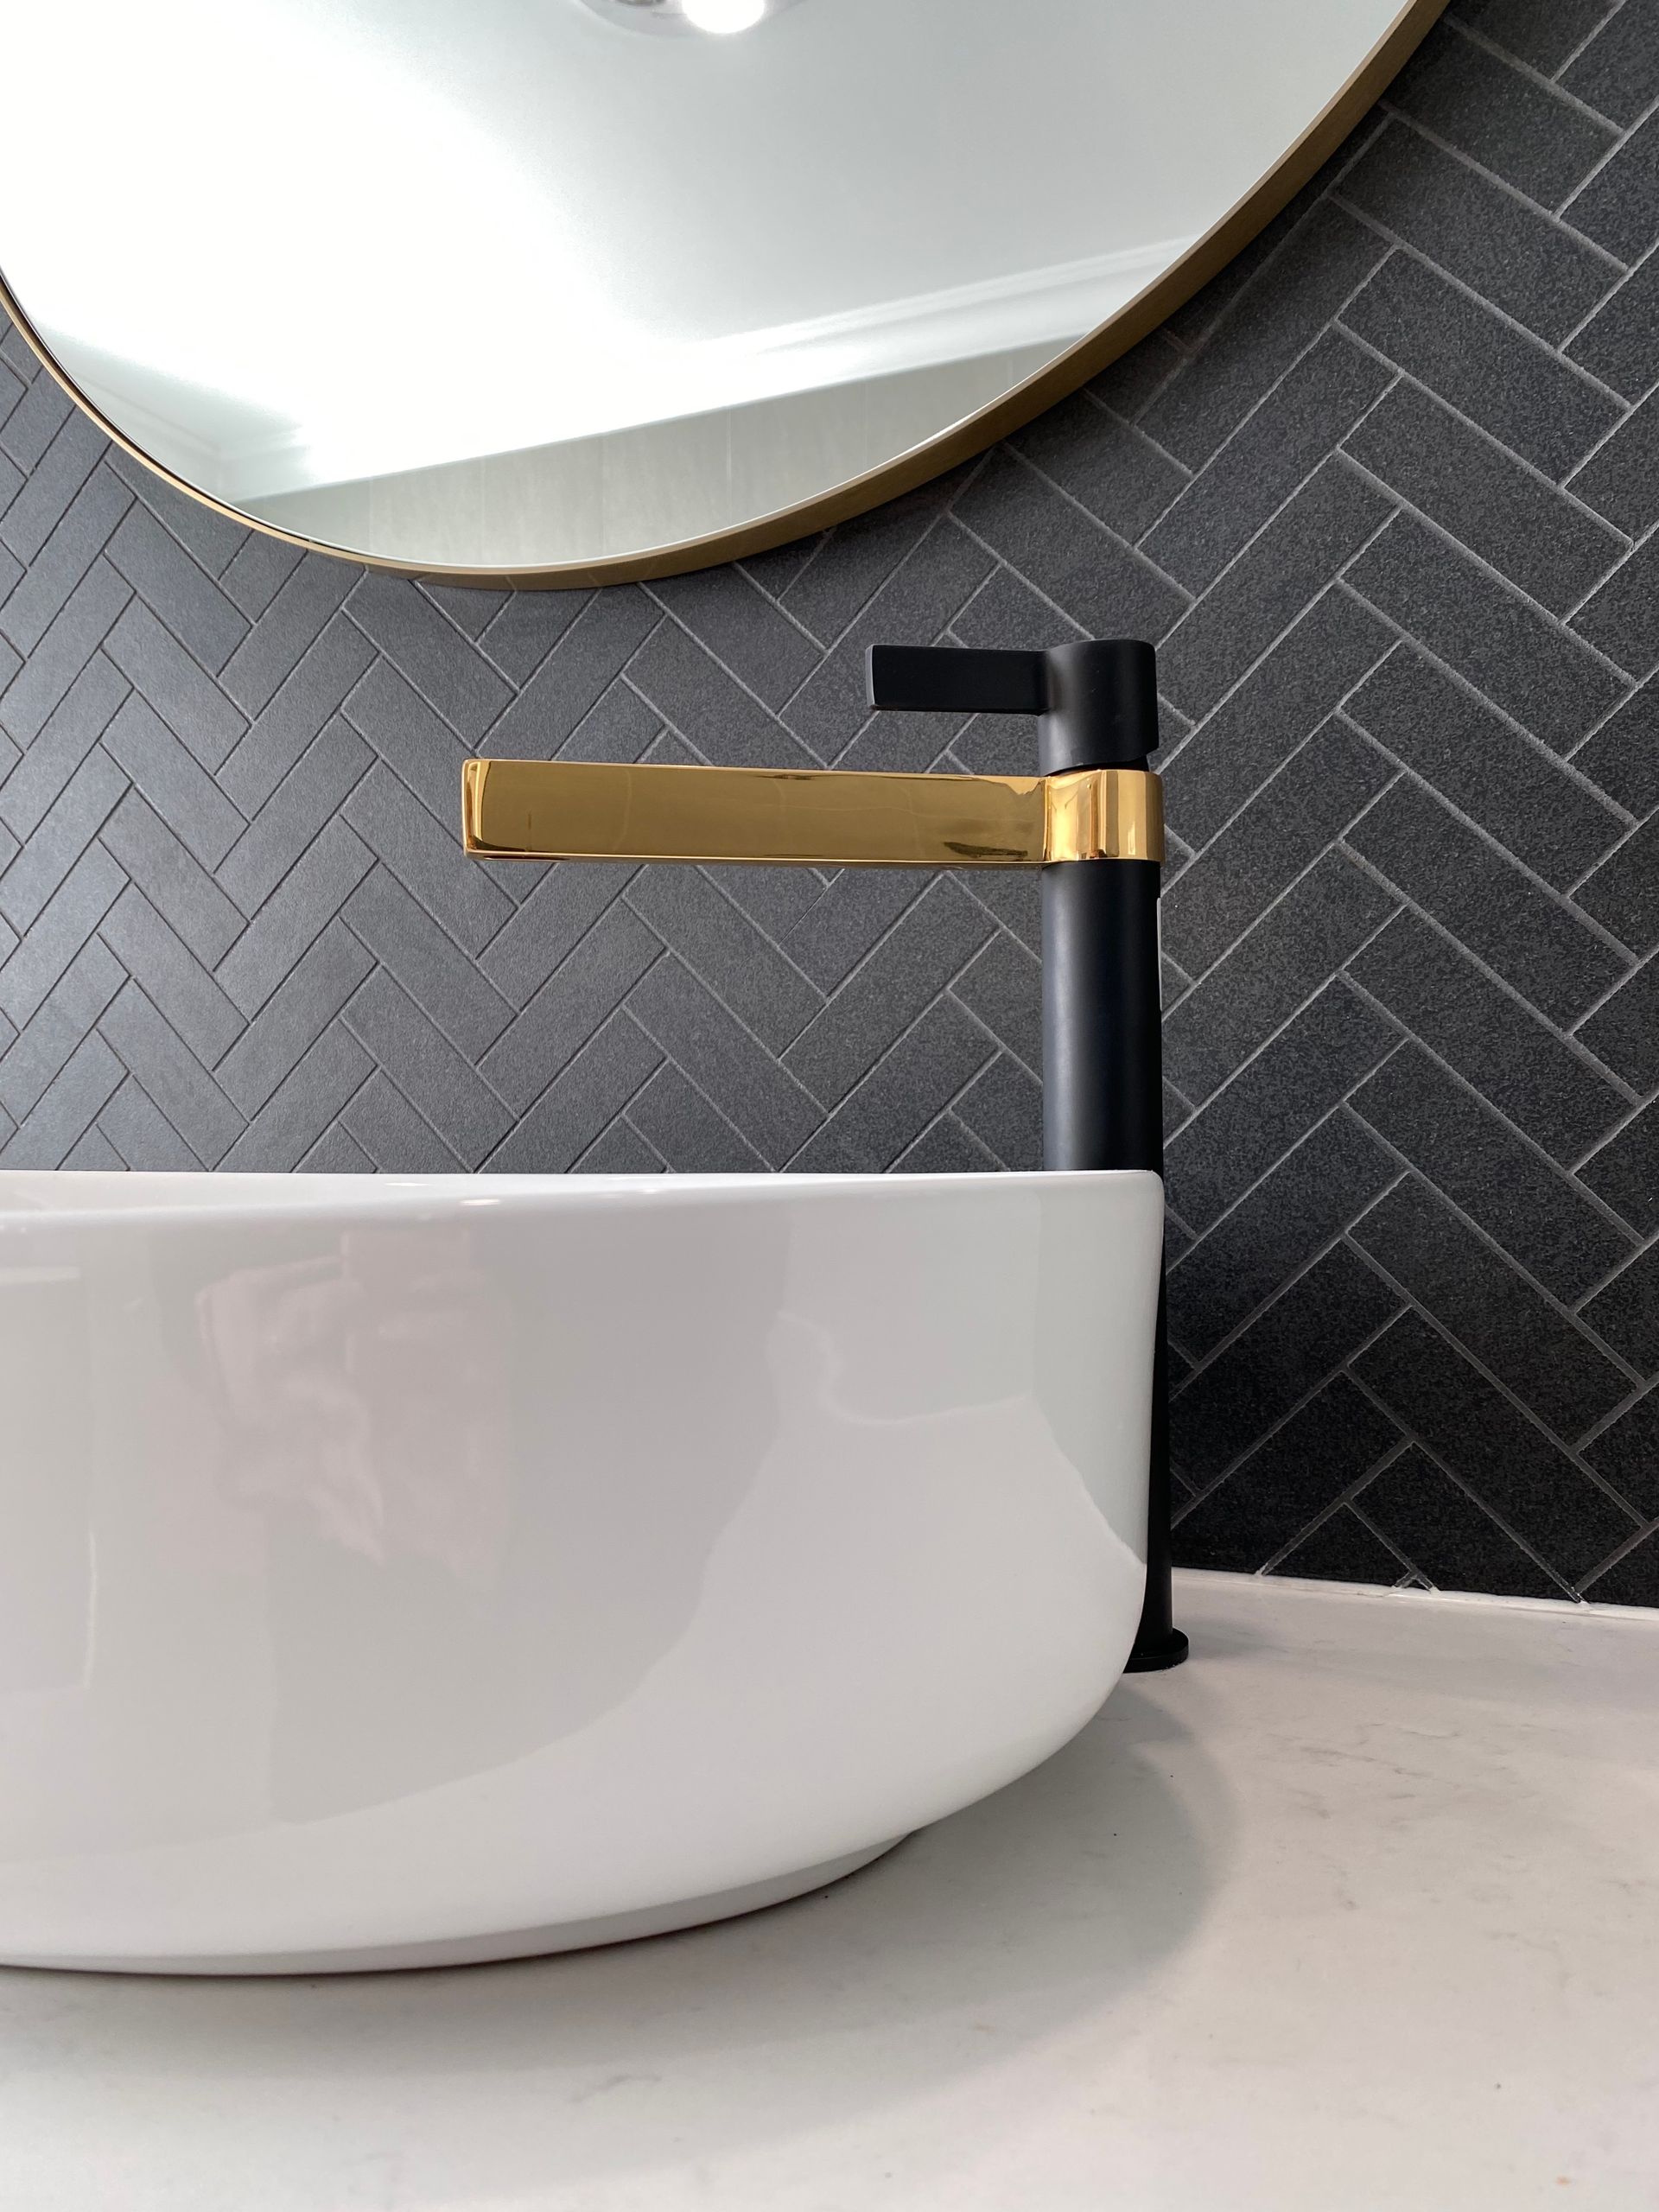 White Sink With Black and Gold Faucet — Kitchen Renovations in Dubbo, QLD